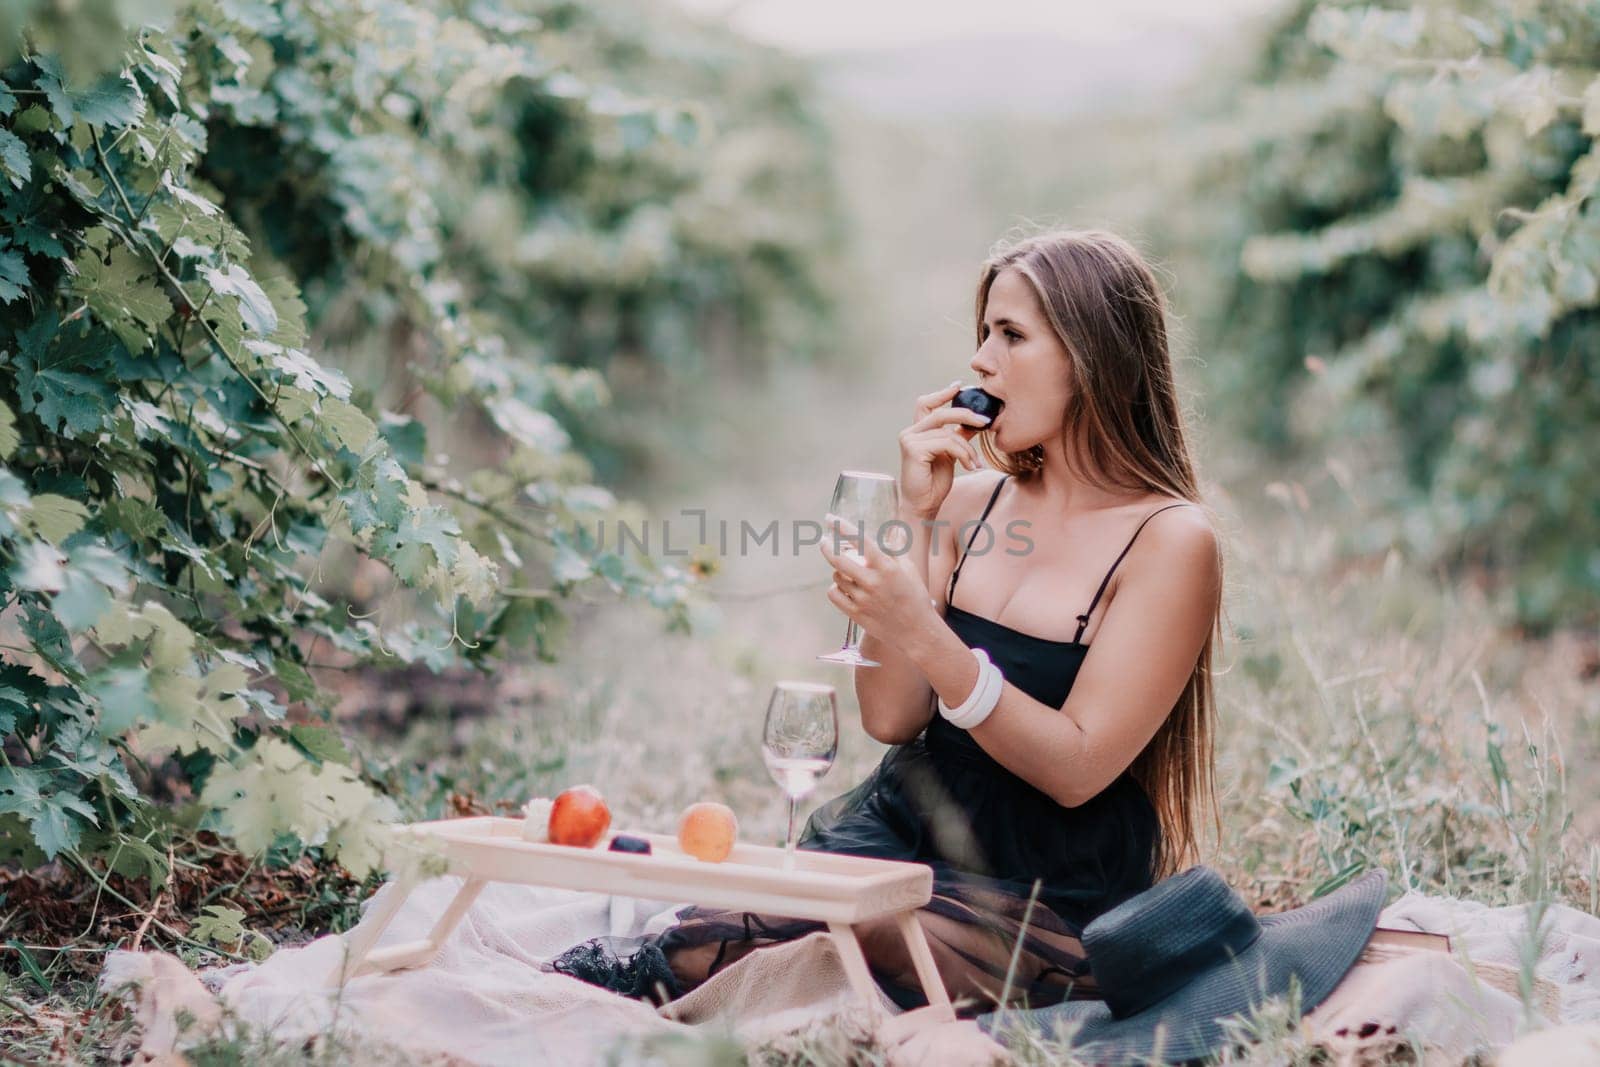 Picnic and wine tasting at sunset in the hills of Italy, Tuscany. Vineyards and open nature in the summer. Romantic dinner, fruit and wine.